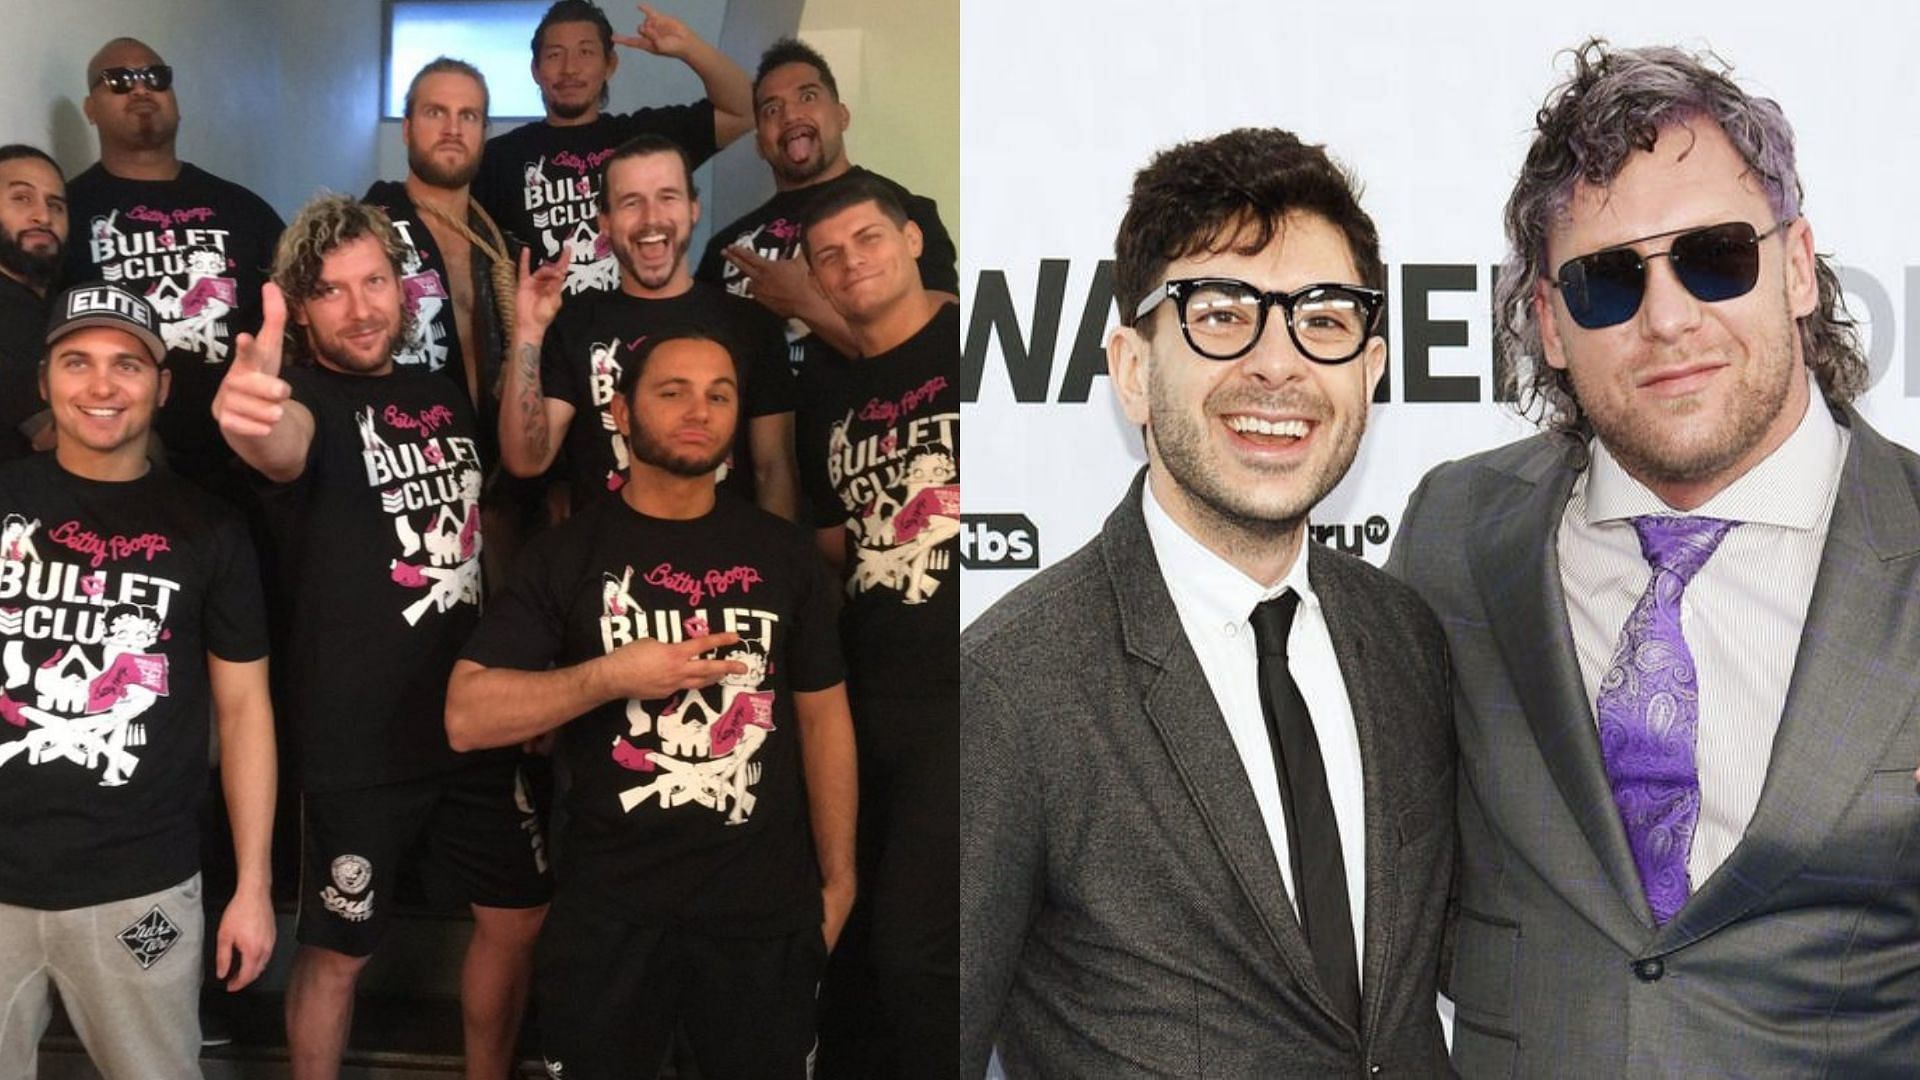 Kenny Omega is a former member of the Bullet Club